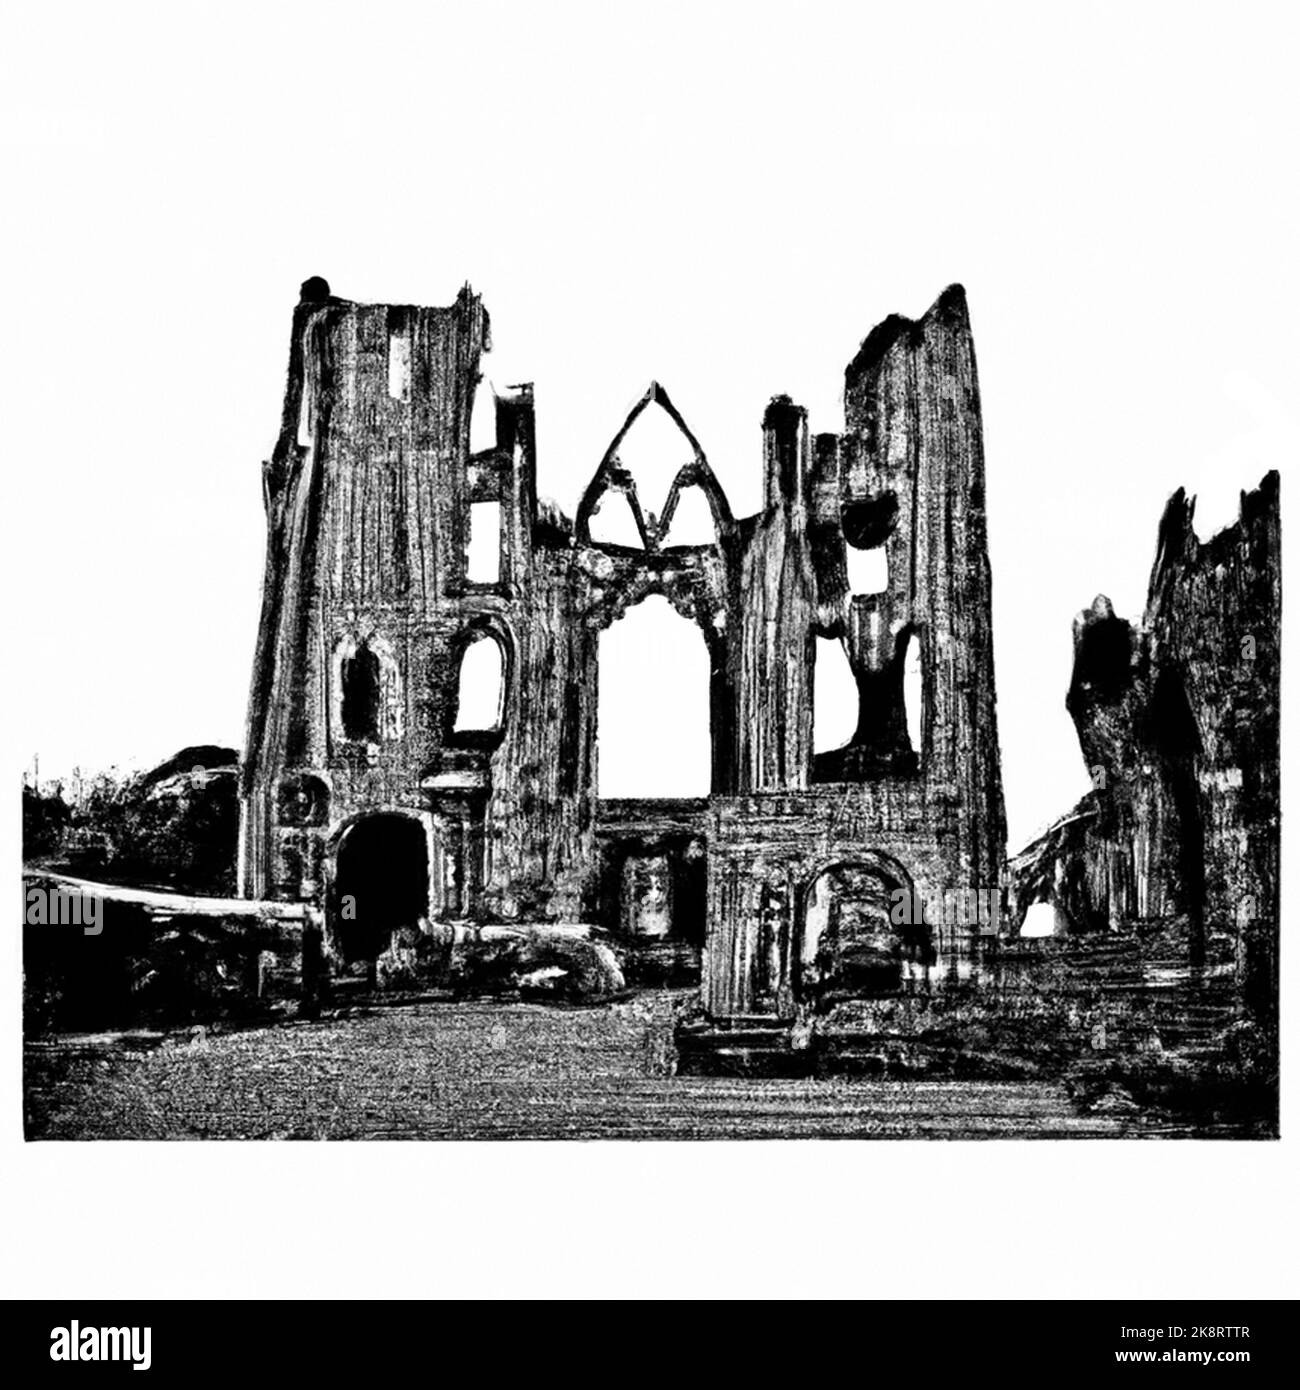 Ancient ruins from old church with towers and entrance. Black and white high contrast illustration. Stock Photo